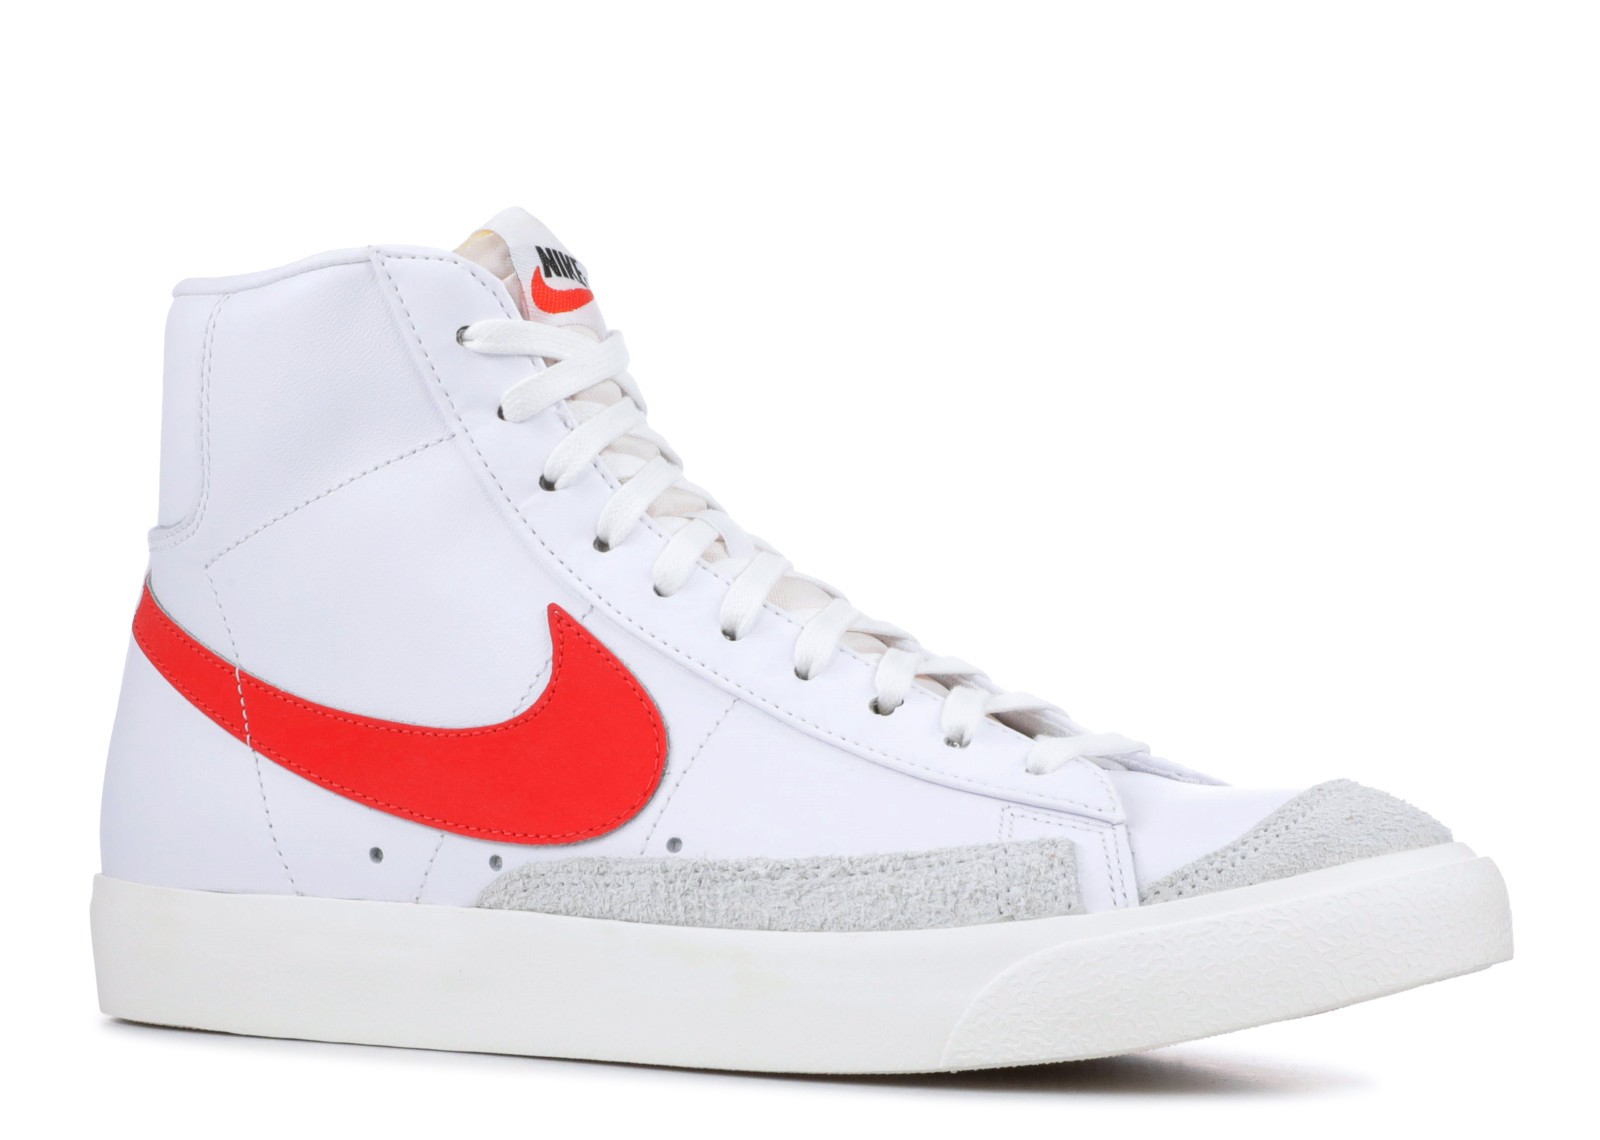 Blazer Mid 77 Vintage Habanero Sail White BQ6806 - 600 - nike air with star on side face pain back - GmarShops